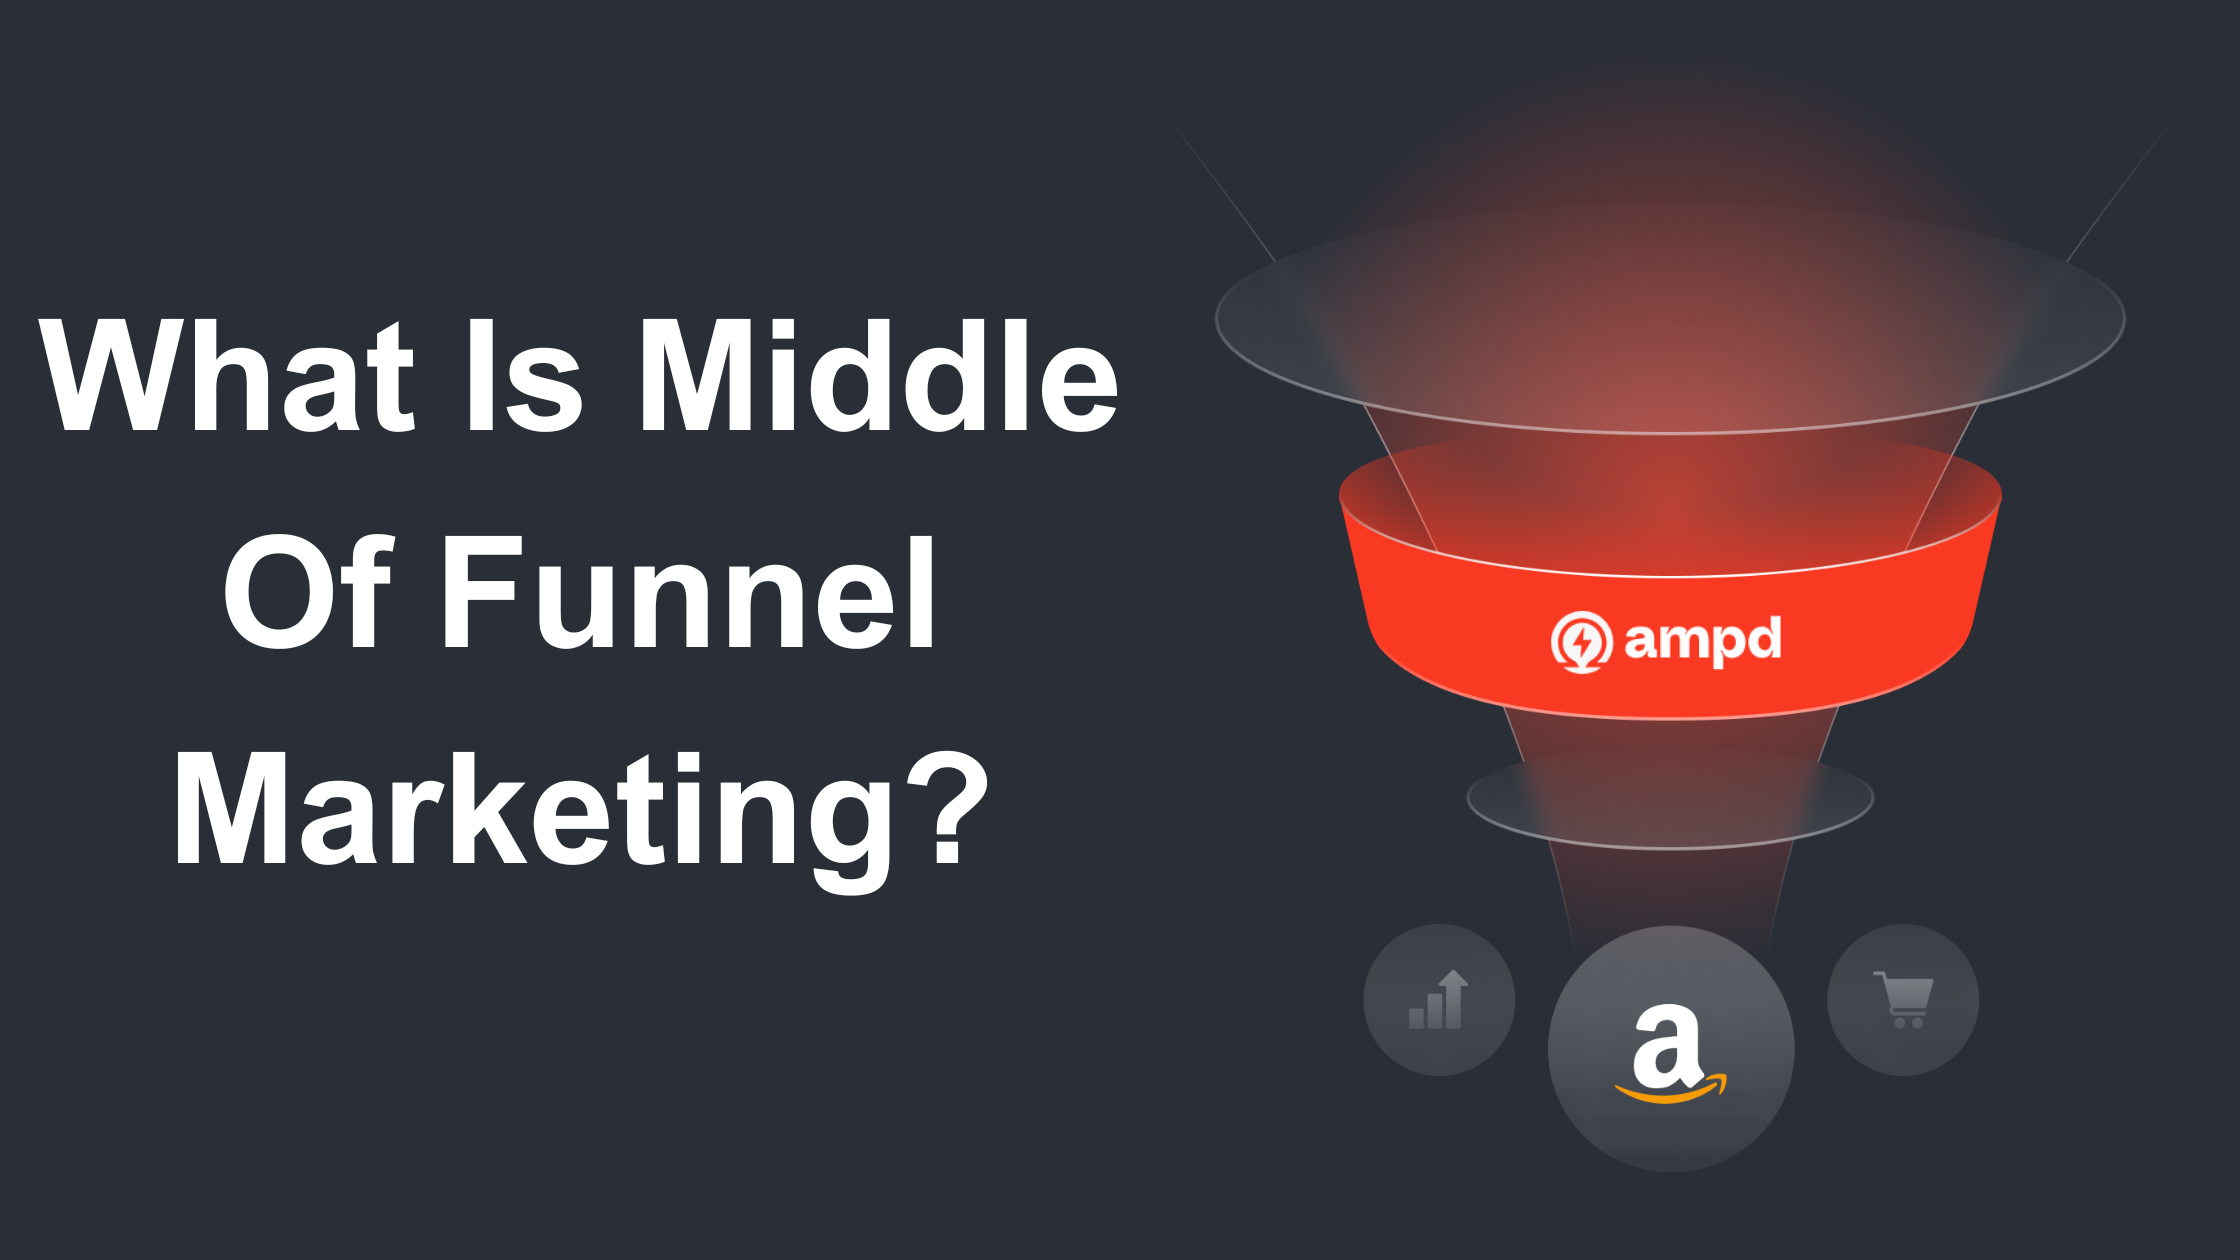 The Essential Guide to Middle of Funnel Marketing Strategies